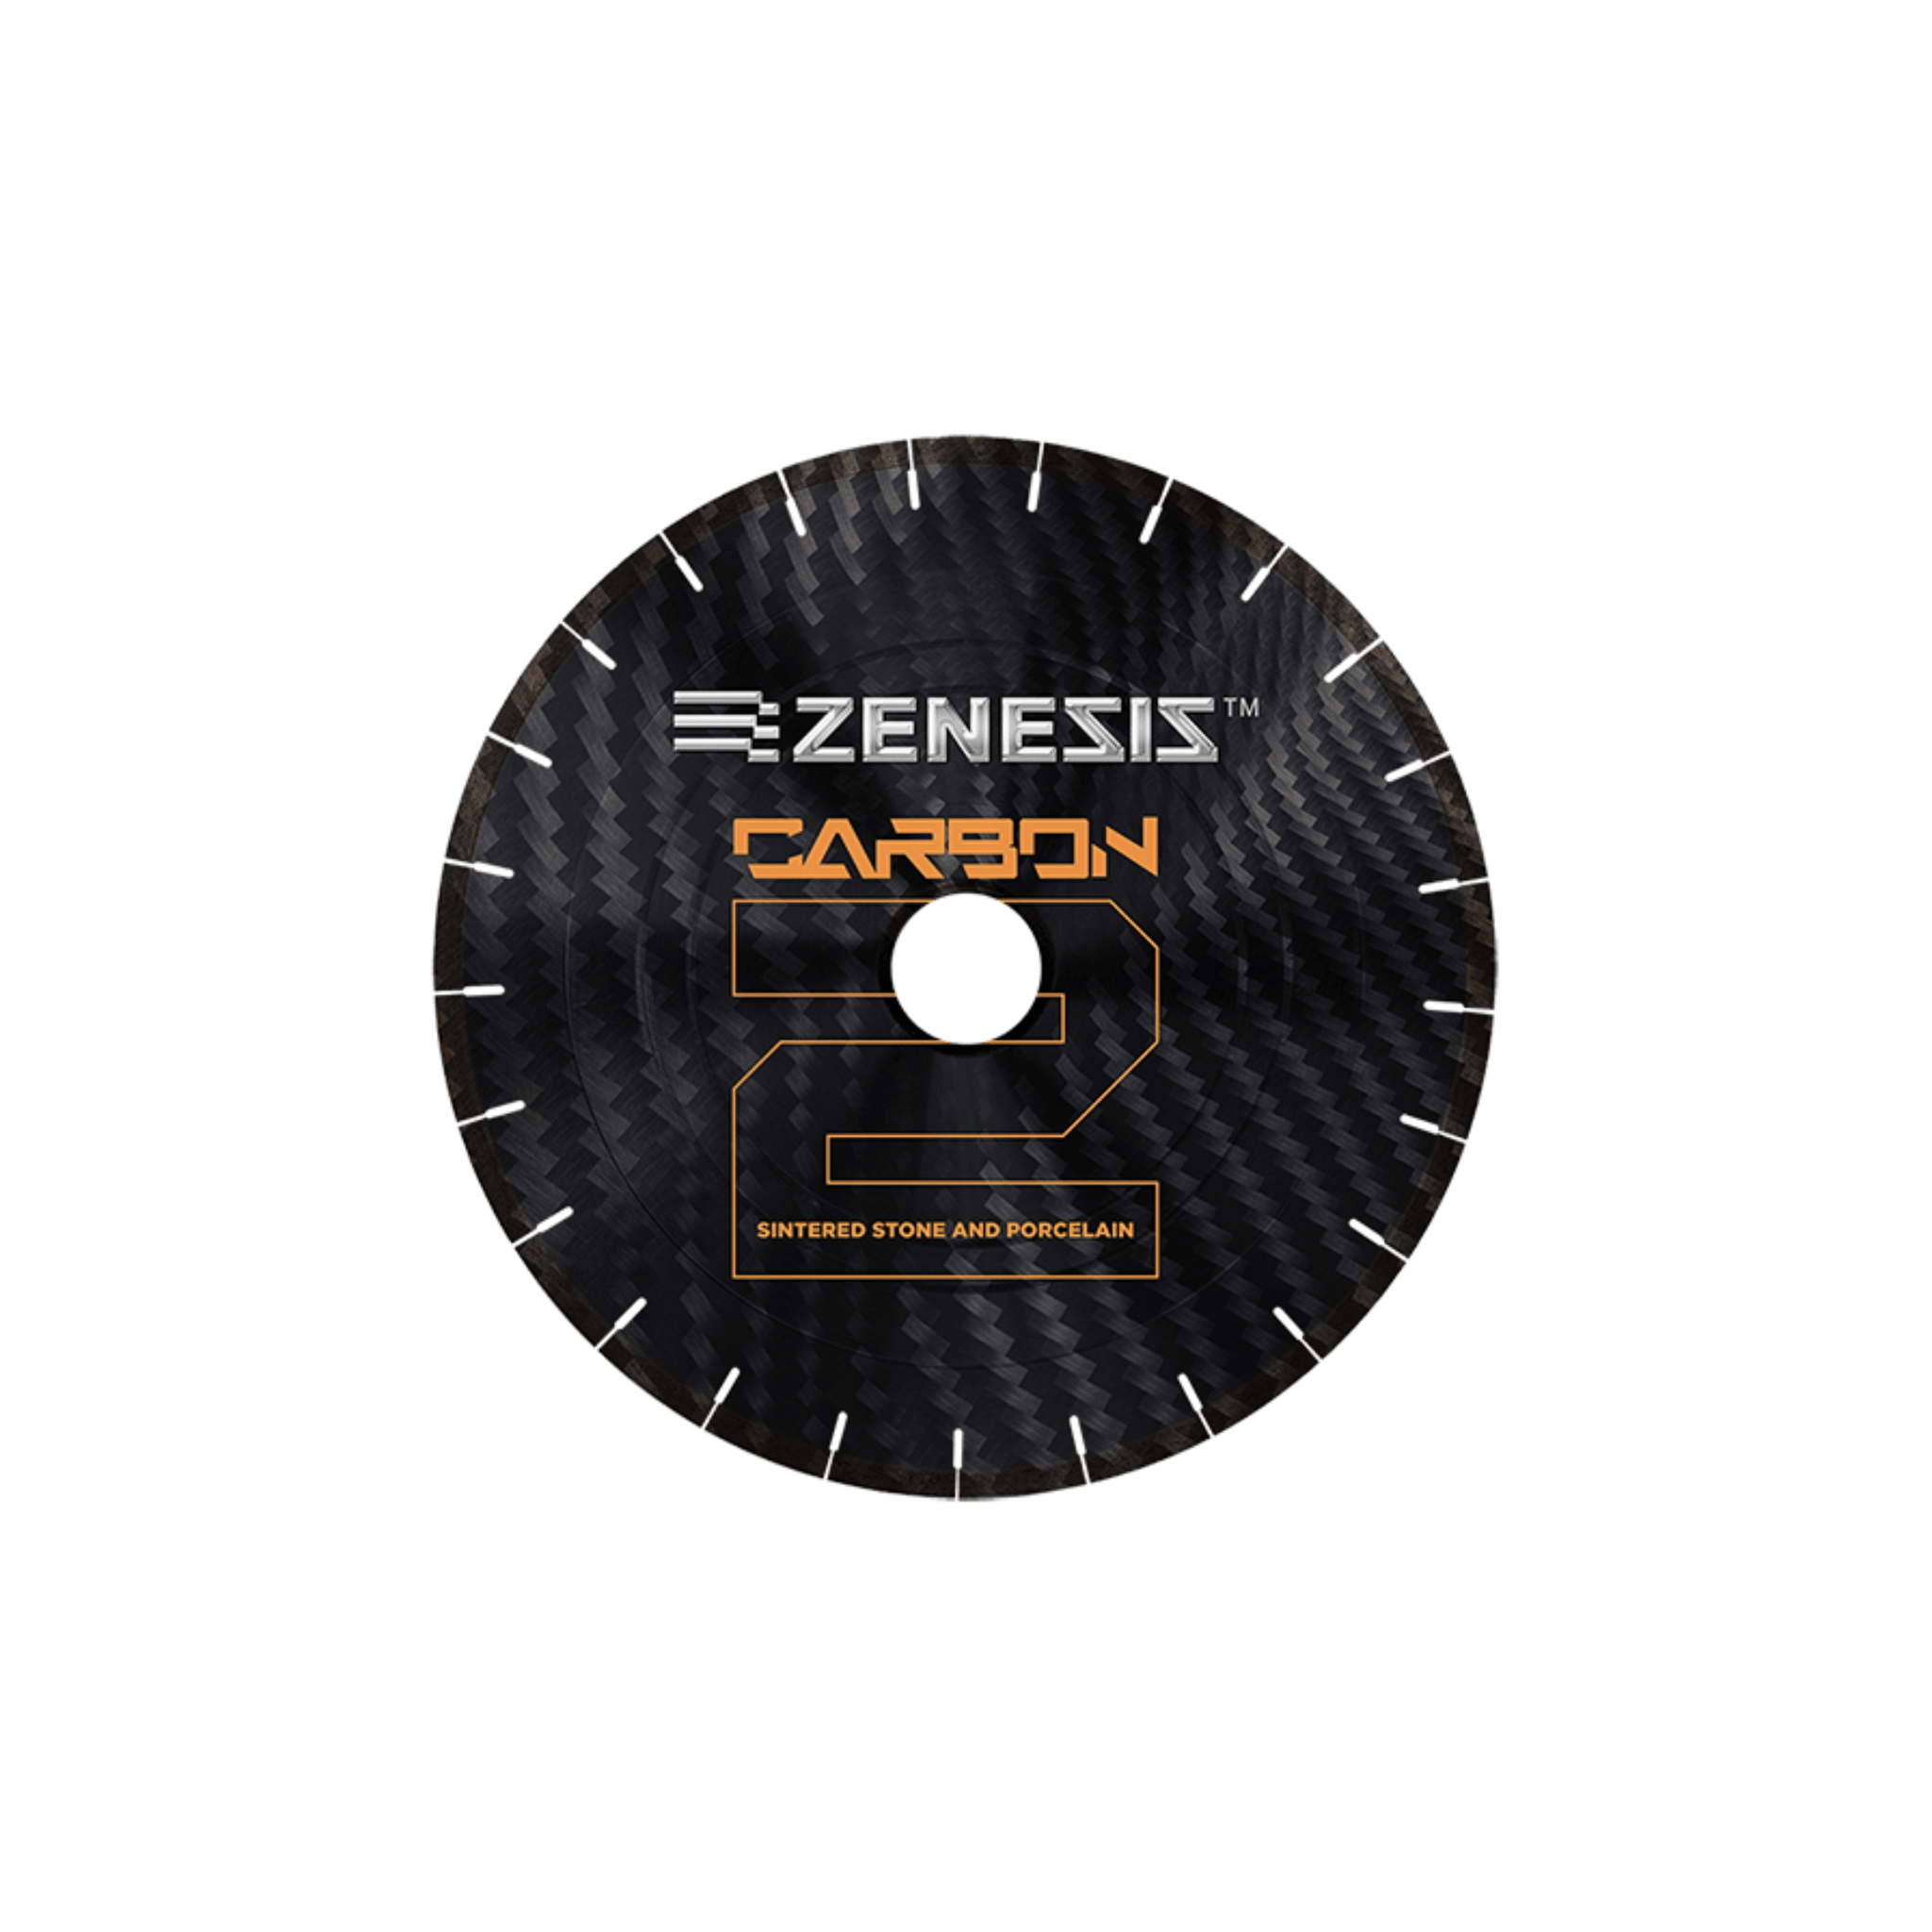 ZENESIS™ Carbon 2 Blade 16" - Direct Stone Tool Supply, Inc